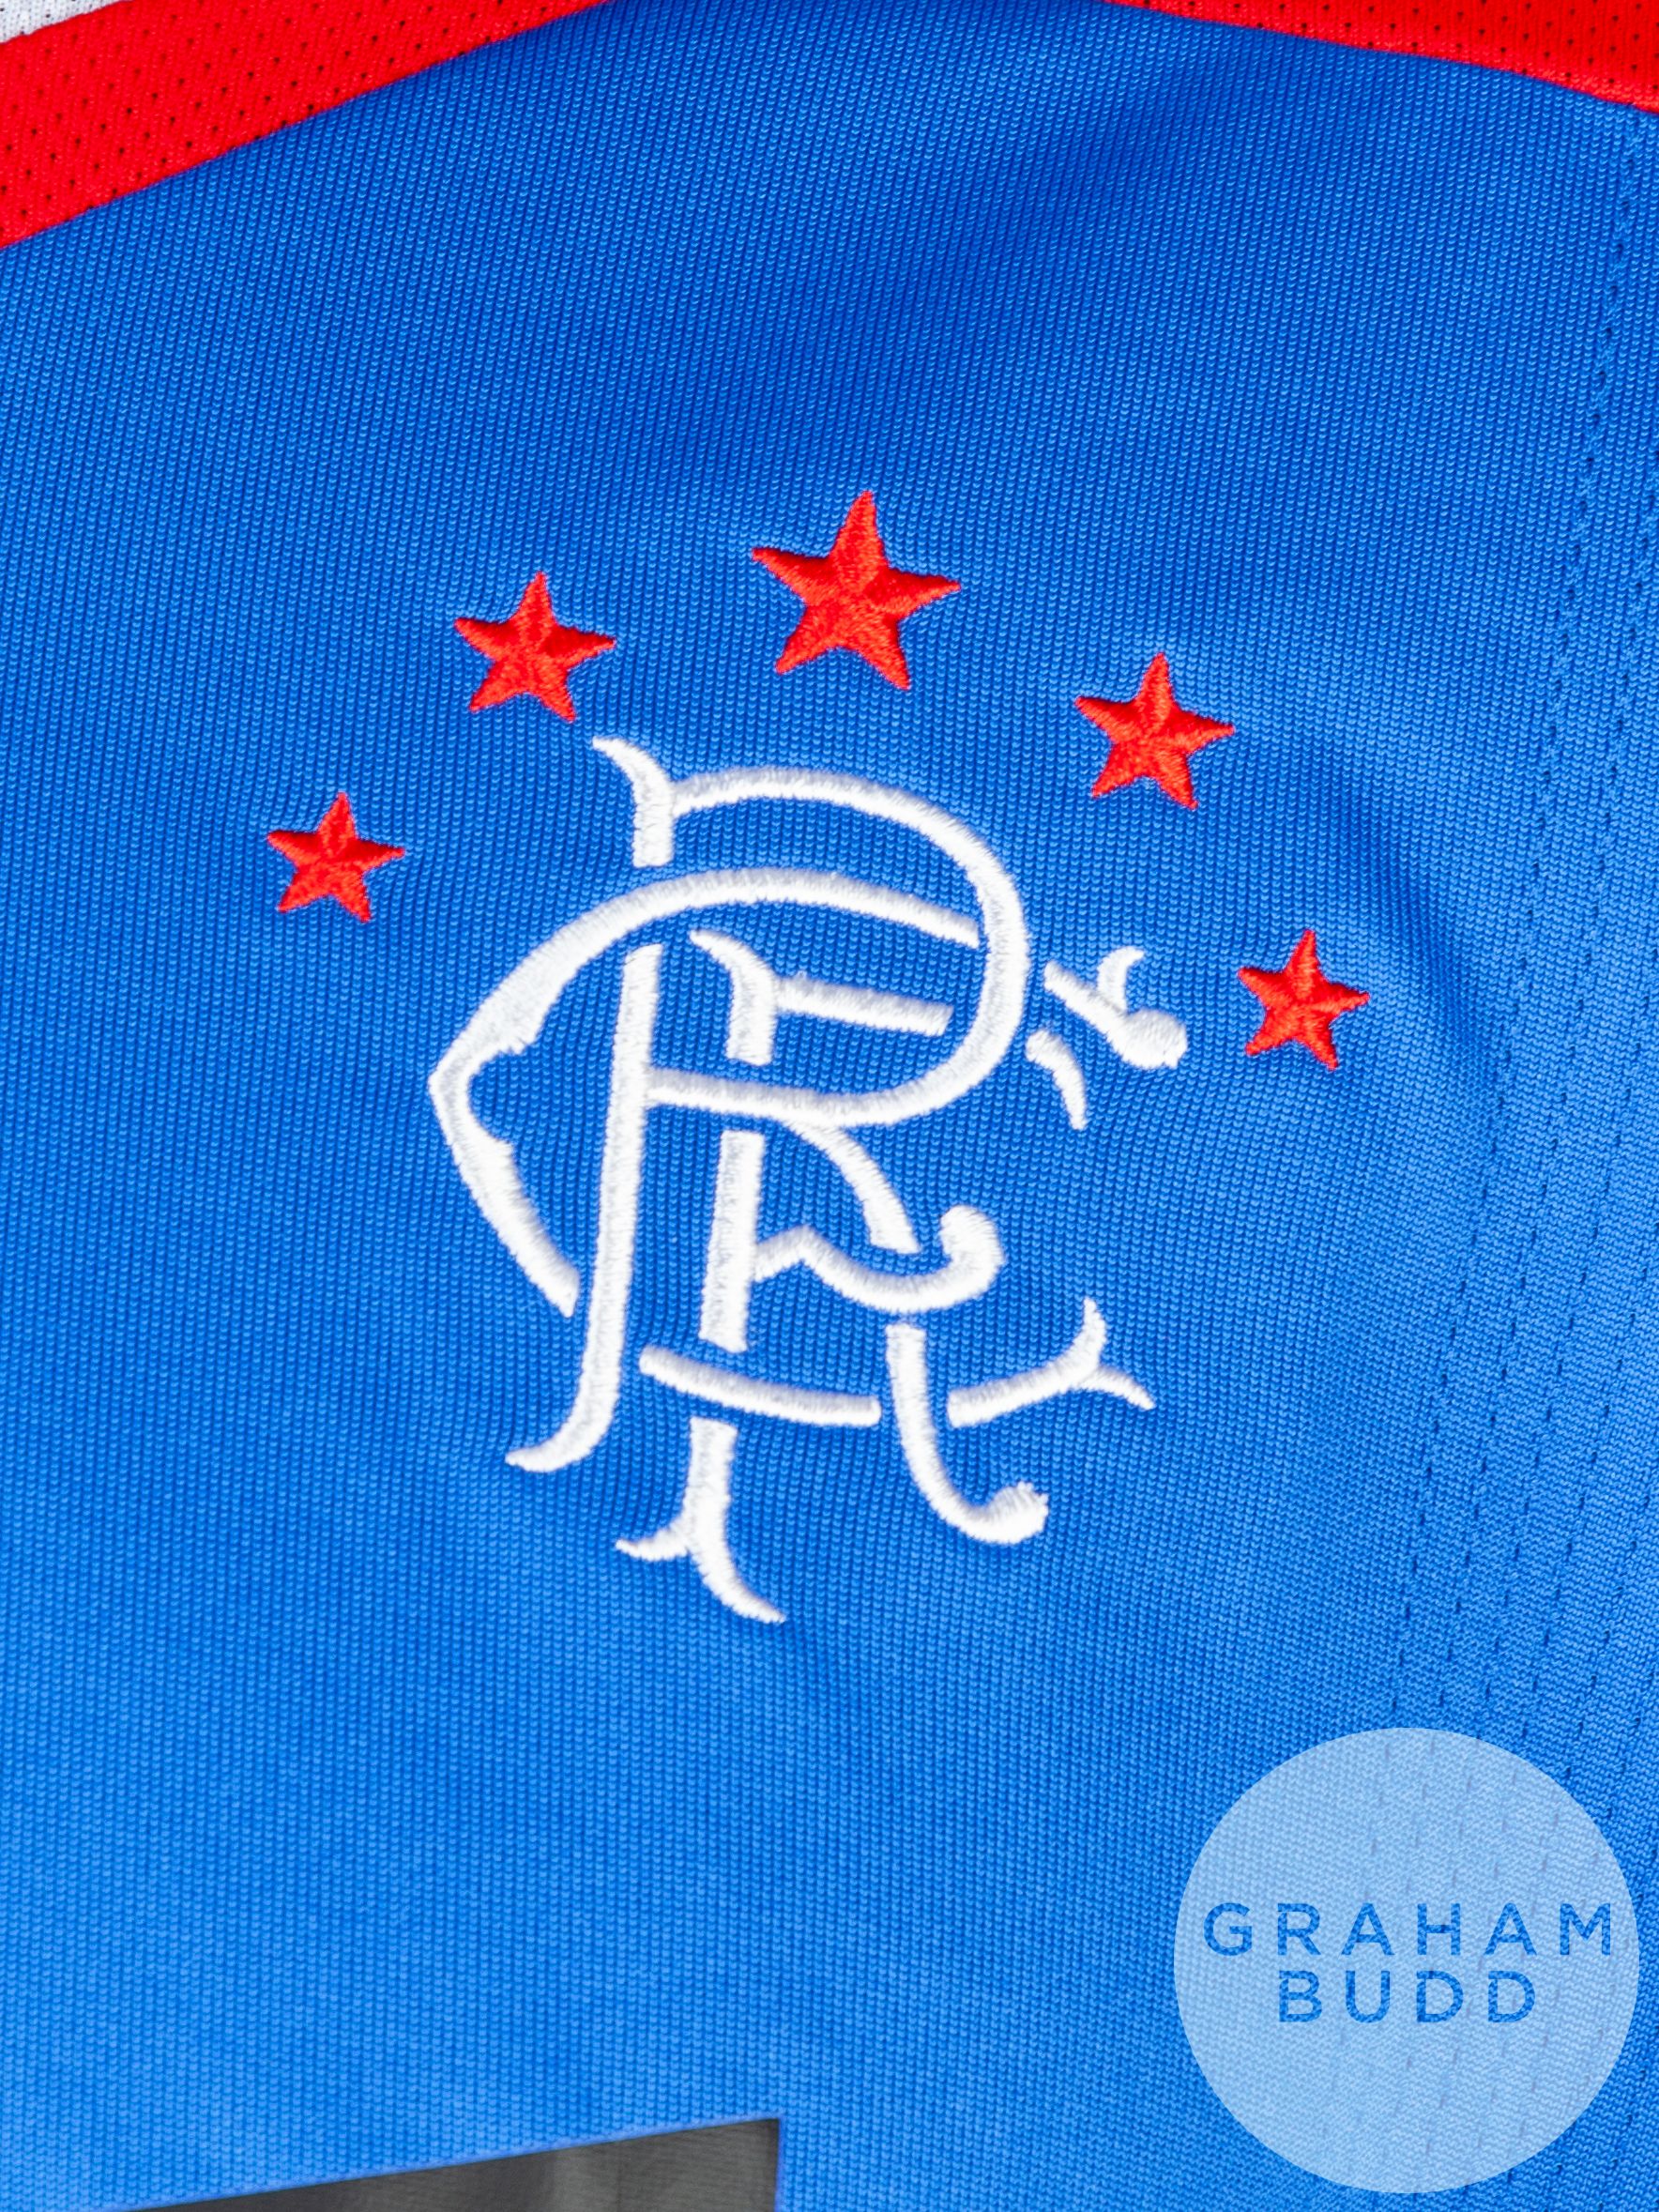 Alan Hutton blue, white and red No.2 Rangers Champions League long-sleeved shirt - Image 3 of 5